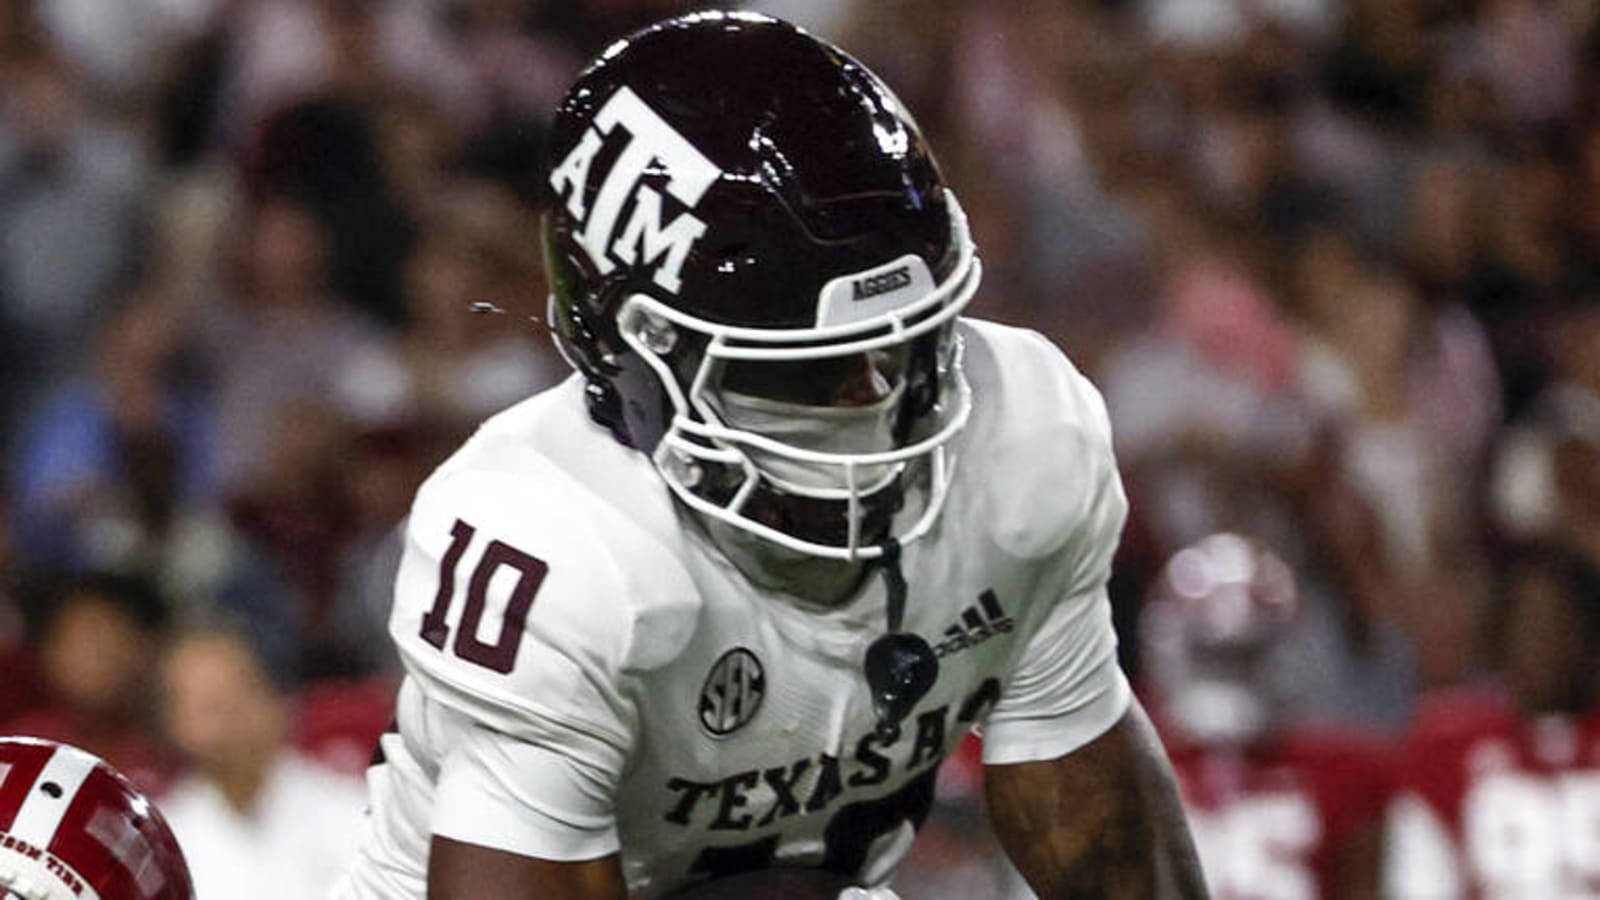 Texas A&M players reportedly suspended over locker room incident